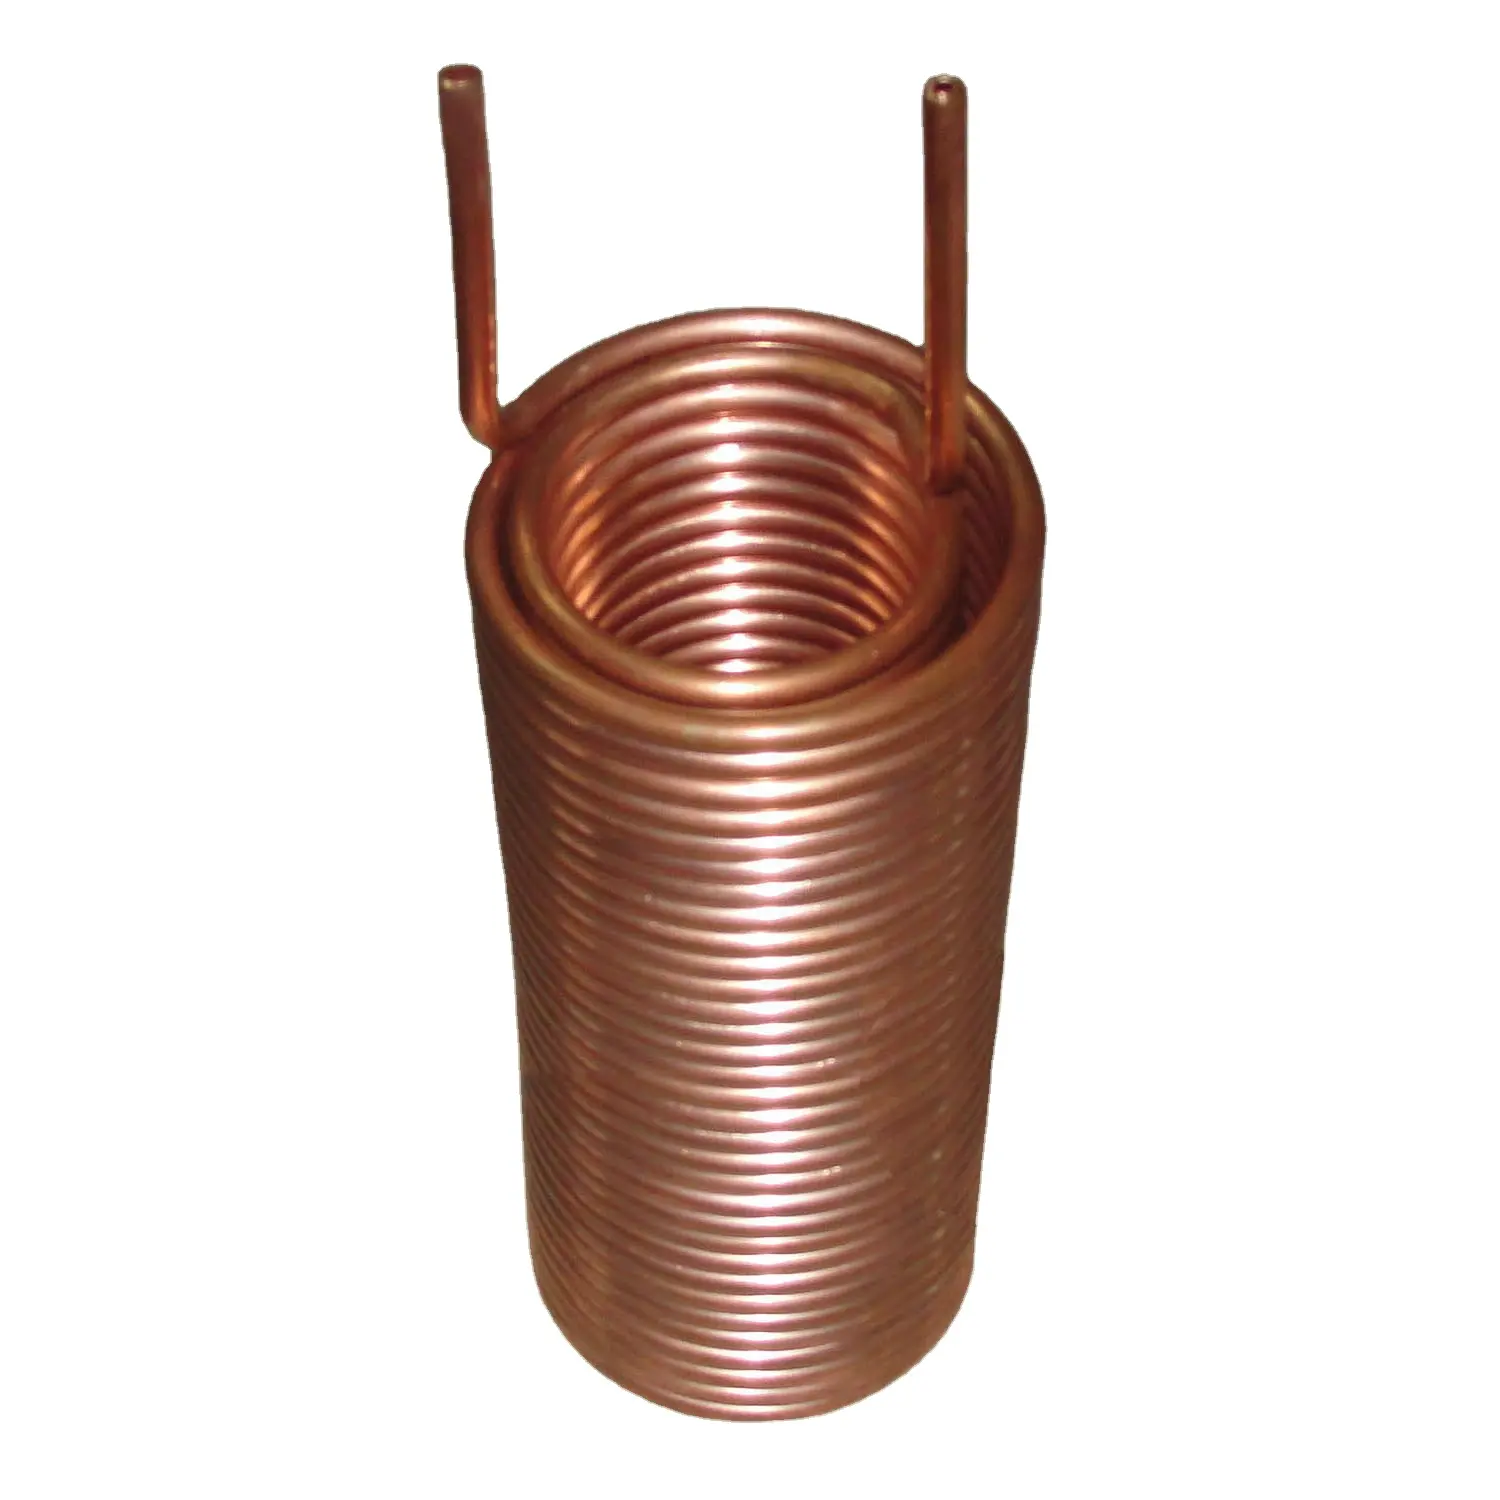 Stainless steel and copper tube cooling coil